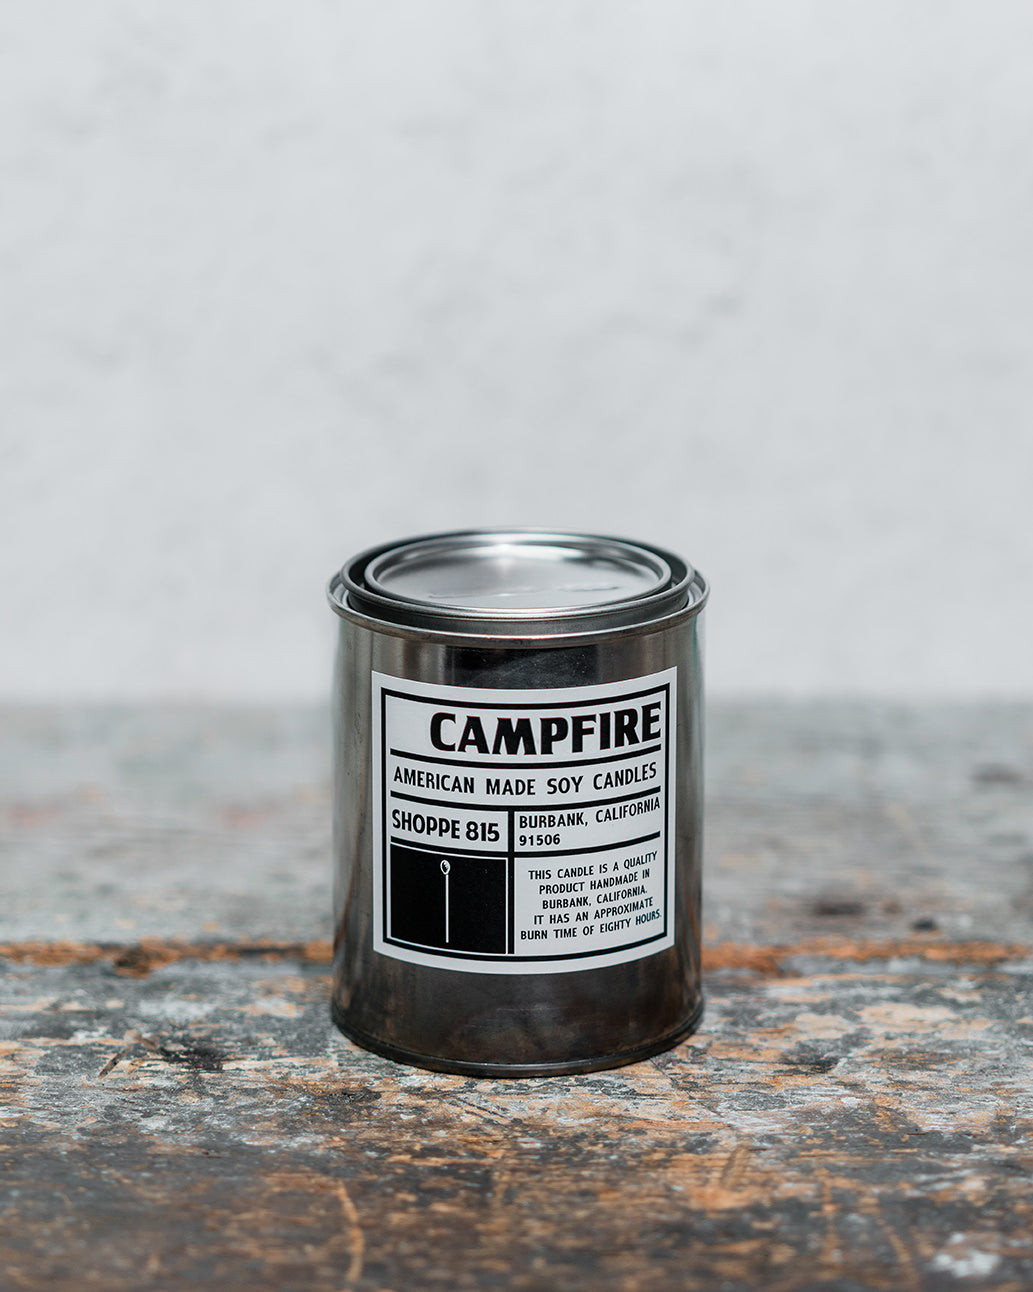 Campfire tin can candle on wooden counter